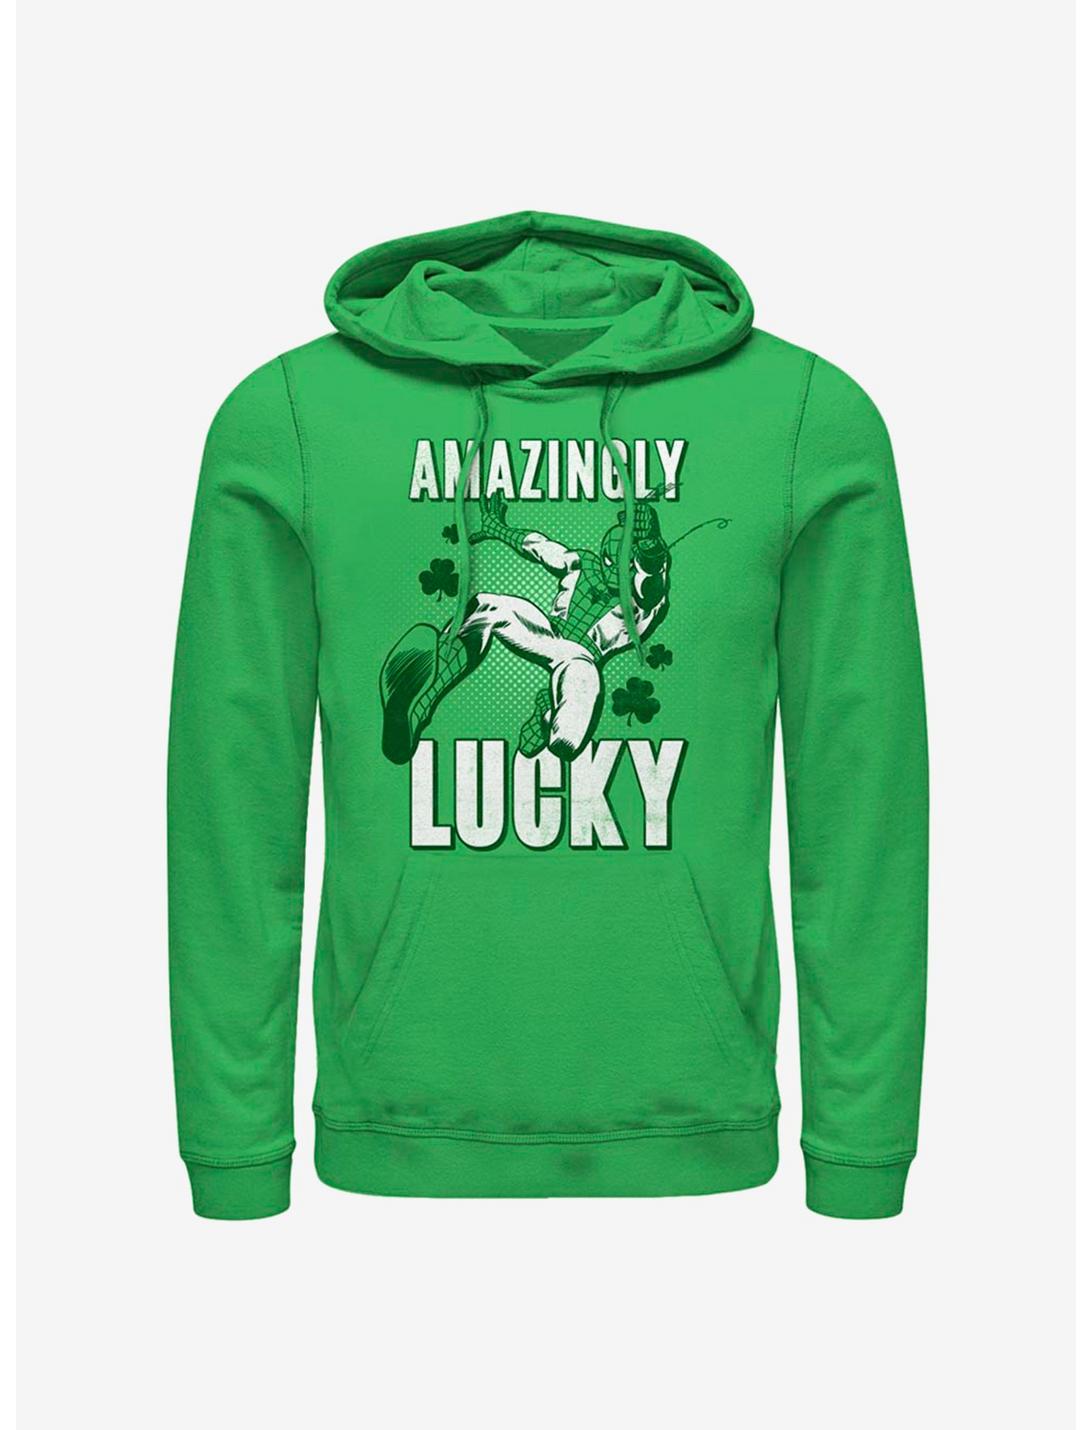 Marvel Spider-Man Amazingly Lucky Hoodie, KELLY, hi-res